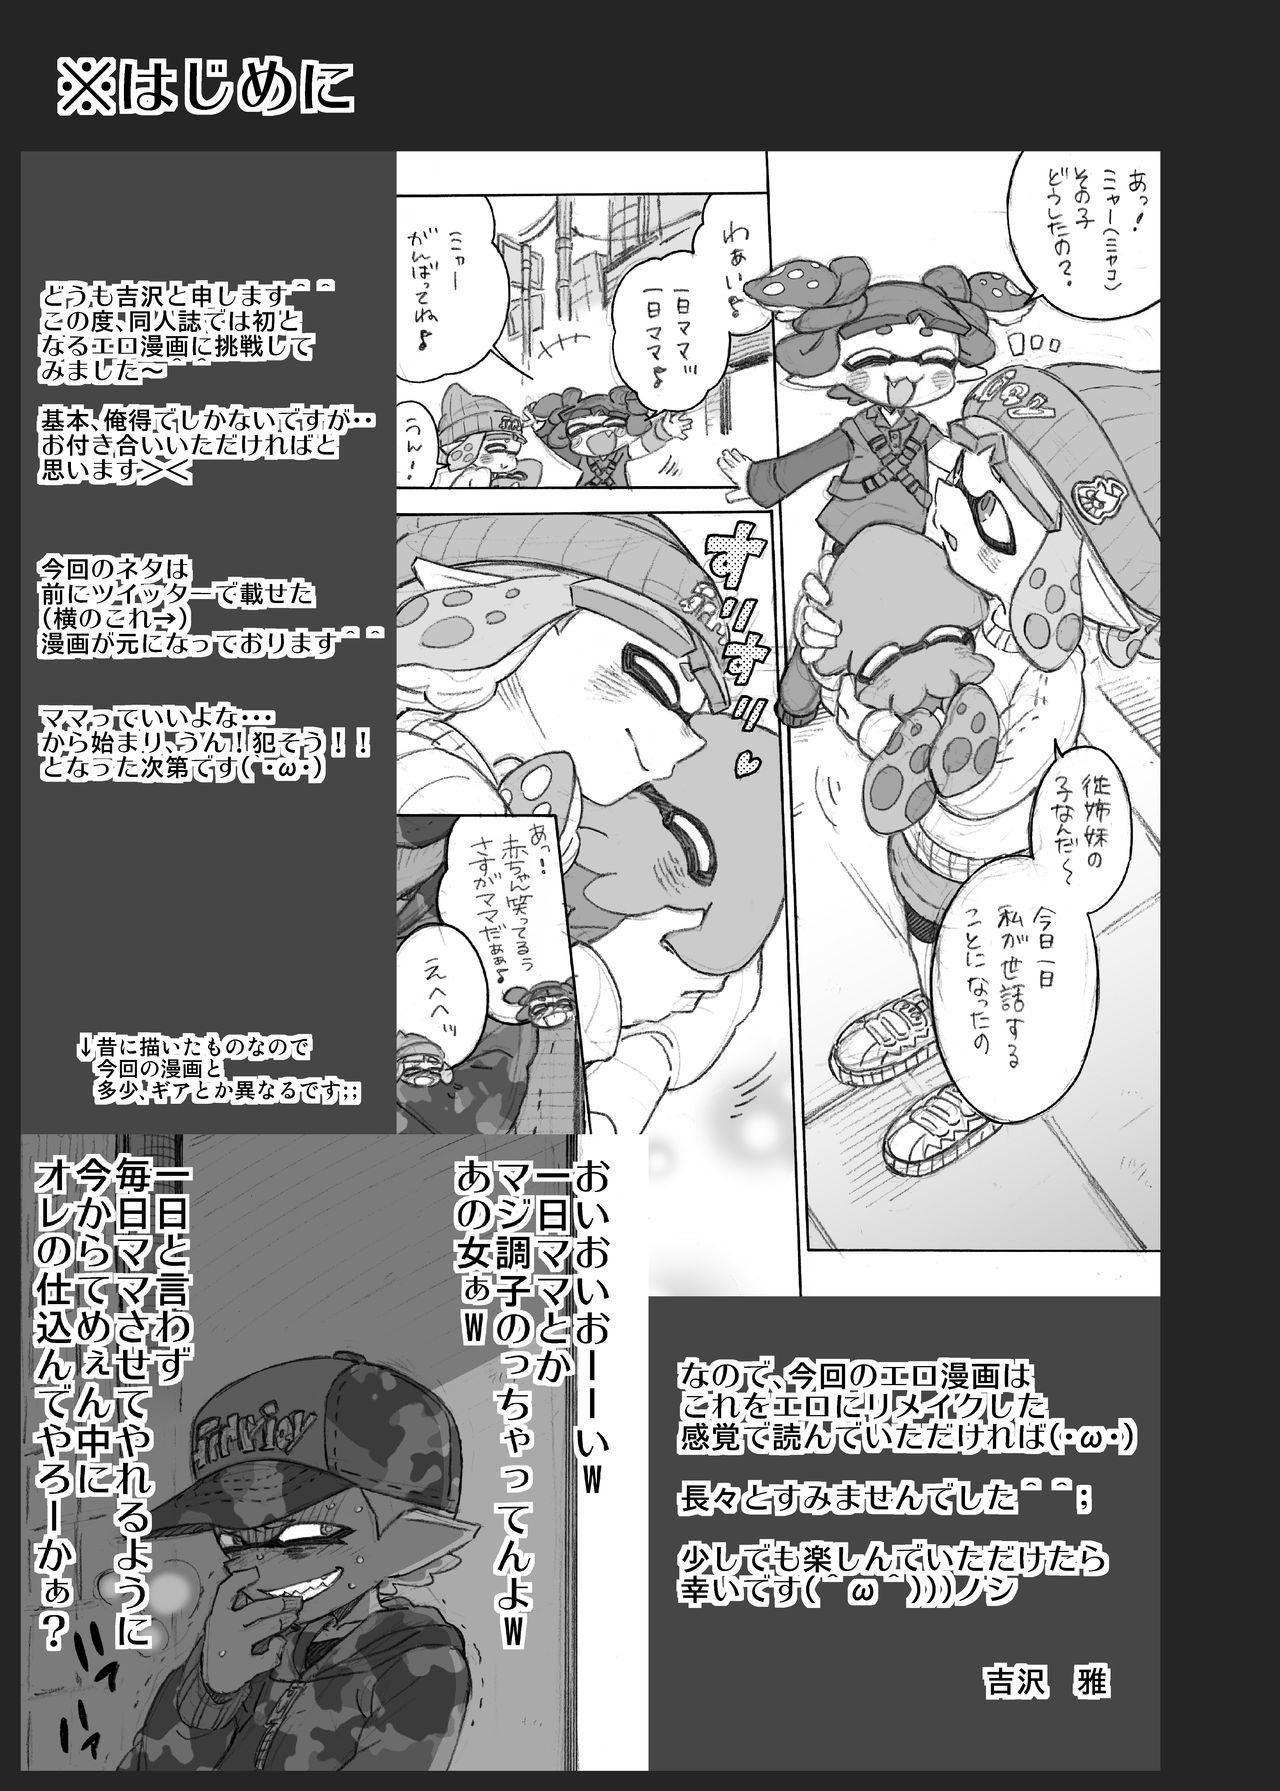 Flaquita Let's make that anxious daughter a mama - Splatoon Dance - Page 2